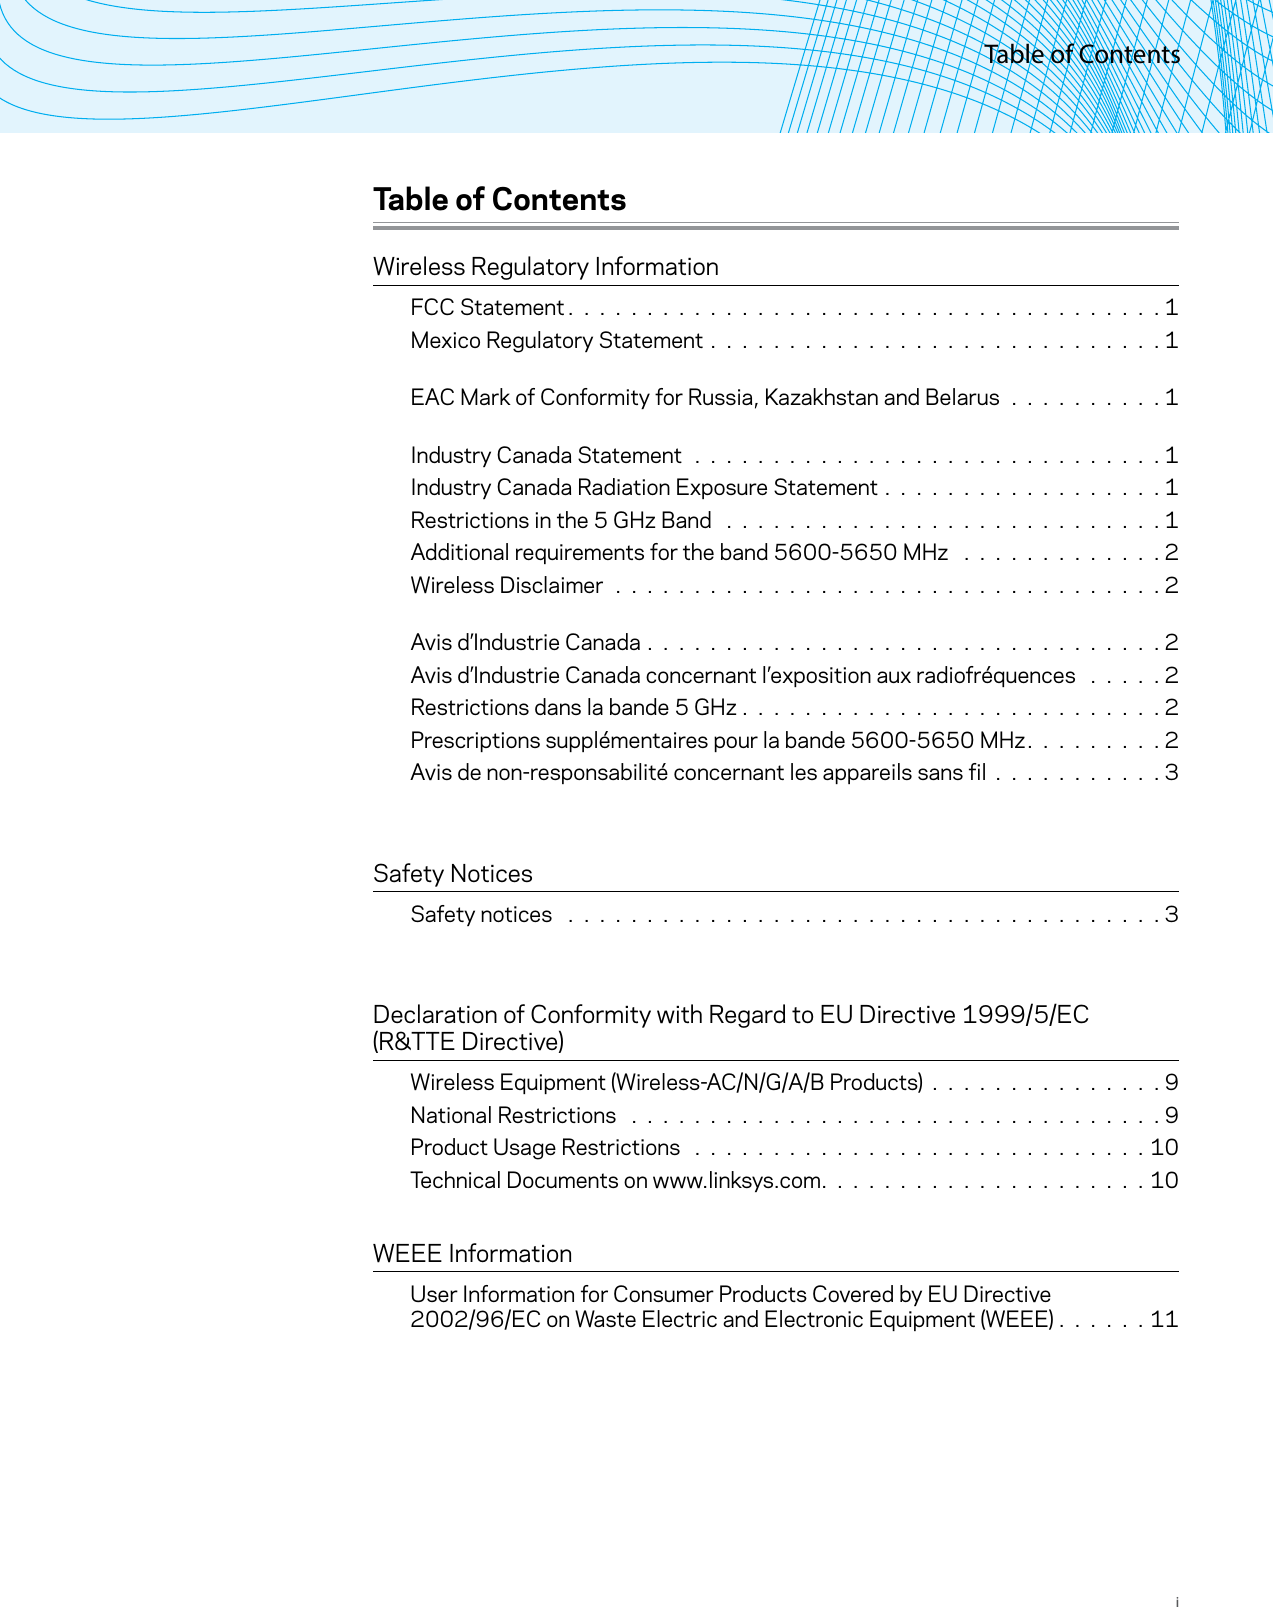 Table of ContentsiTable of ContentsWireless Regulatory InformationFCC Statement. . . . . . . . . . . . . . . . . . . . . . . . . . . . . . . . . . . . . .1Mexico Regulatory Statement . . . . . . . . . . . . . . . . . . . . . . . . . . . . . 1 EAC Mark of Conformity for Russia, Kazakhstan and Belarus . . . . . . . . . . 1 Industry Canada Statement . . . . . . . . . . . . . . . . . . . . . . . . . . . . . . 1Industry Canada Radiation Exposure Statement . . . . . . . . . . . . . . . . . . 1Restrictions in the 5 GHz Band  . . . . . . . . . . . . . . . . . . . . . . . . . . . . 1Additional requirements for the band 5600-5650 MHz  . . . . . . . . . . . . . 2Wireless Disclaimer . . . . . . . . . . . . . . . . . . . . . . . . . . . . . . . . . . . 2 Avis d’Industrie Canada . . . . . . . . . . . . . . . . . . . . . . . . . . . . . . . . . 2Avis d’Industrie Canada concernant l’exposition aux radiofréquences  . . . . . 2Restrictions dans la bande 5 GHz . . . . . . . . . . . . . . . . . . . . . . . . . . . 2Prescriptions supplémentaires pour la bande 5600-5650 MHz. . . . . . . . .2Avis de non-responsabilité concernant les appareils sans fil . . . . . . . . . . . 3  Safety NoticesSafety notices  . . . . . . . . . . . . . . . . . . . . . . . . . . . . . . . . . . . . . . 3  Declaration of Conformity with Regard to EU Directive 1999/5/EC  (R&amp;TTE Directive)Wireless Equipment (Wireless-AC/N/G/A/B Products) . . . . . . . . . . . . . . . 9National Restrictions  . . . . . . . . . . . . . . . . . . . . . . . . . . . . . . . . . . 9Product Usage Restrictions  . . . . . . . . . . . . . . . . . . . . . . . . . . . . . 10Technical Documents on www.linksys.com. . . . . . . . . . . . . . . . . . . . .10 WEEE InformationUser Information for Consumer Products Covered by EU Directive  2002/96/EC on Waste Electric and Electronic Equipment (WEEE) .  .  .  .  .  . 11